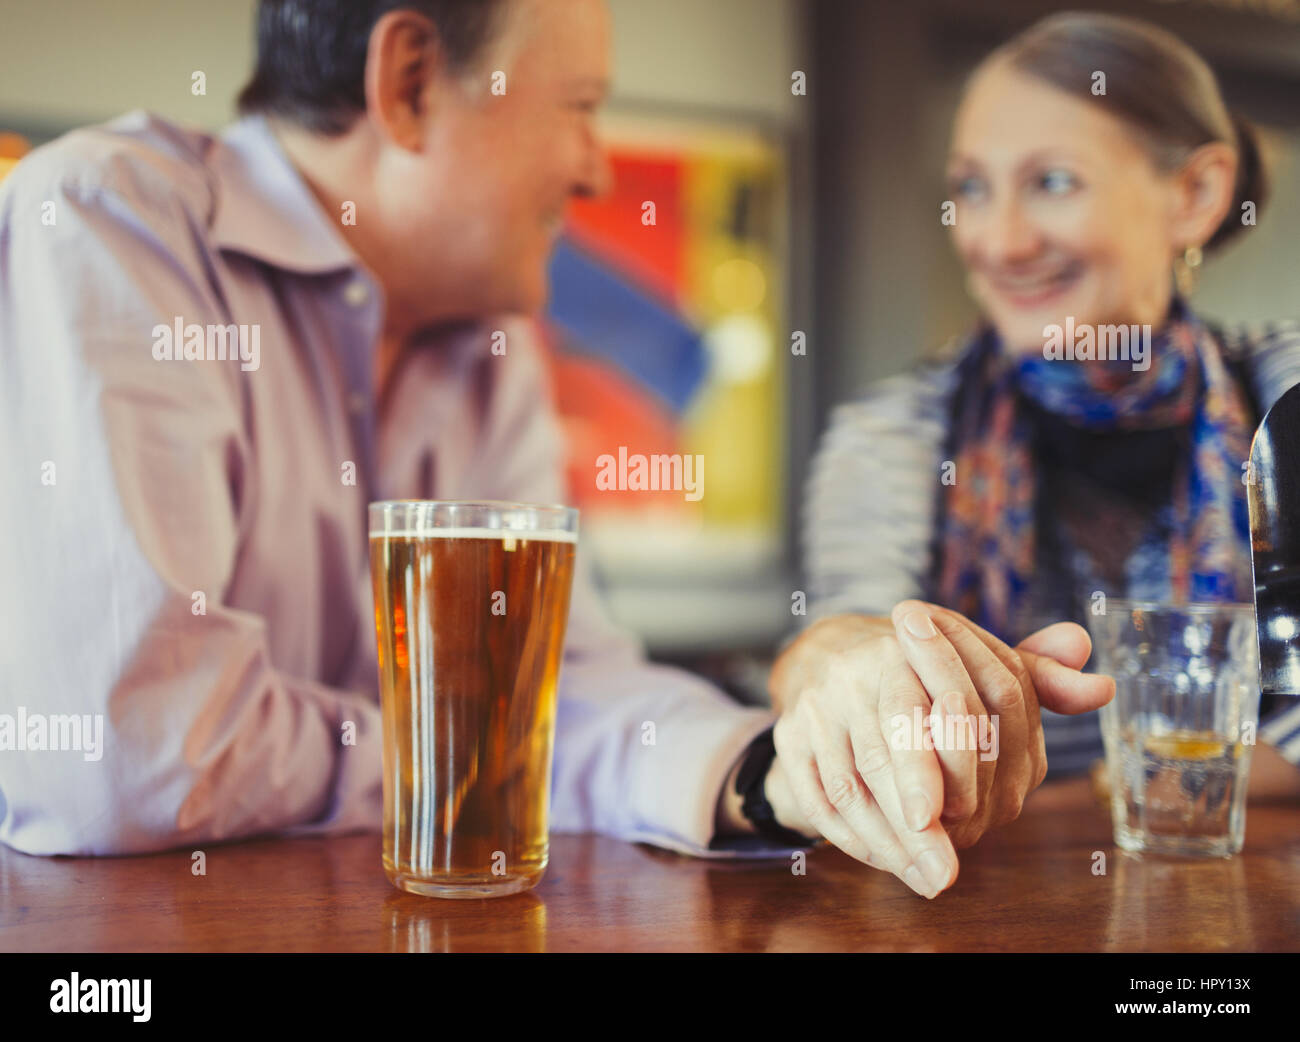 Senior couple holding hands drinking beer at bar Stock Photo